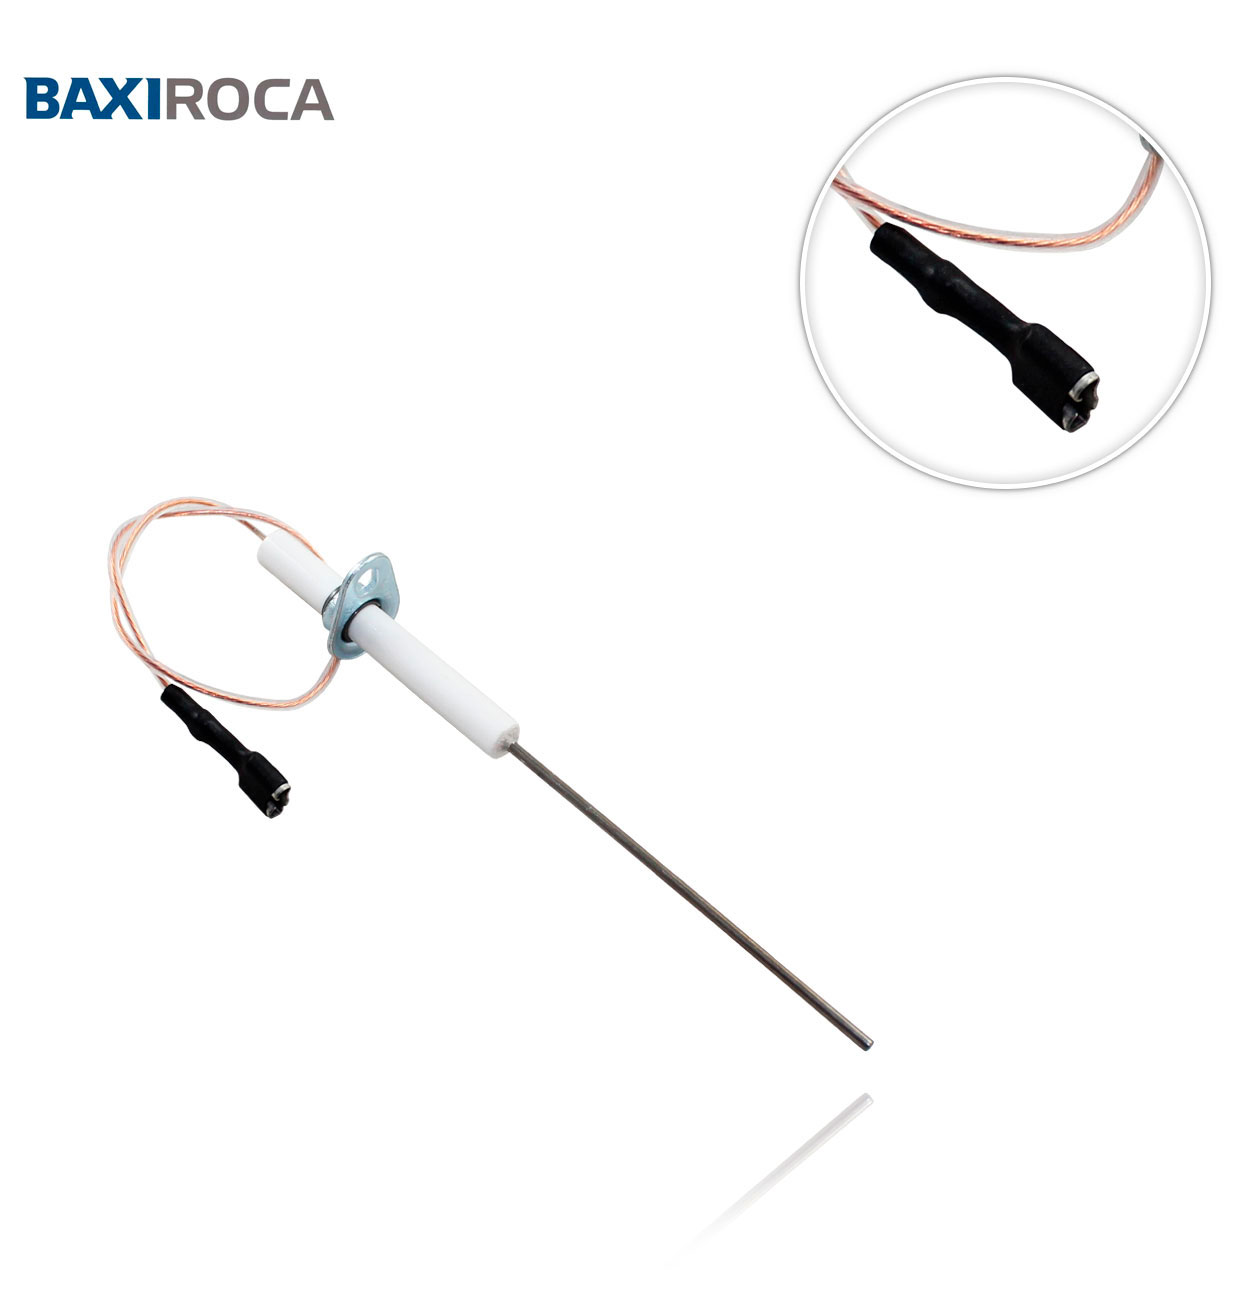 G100 70/90/110 IE IONISATION PROBE WITH CABLE ROCA 141041609